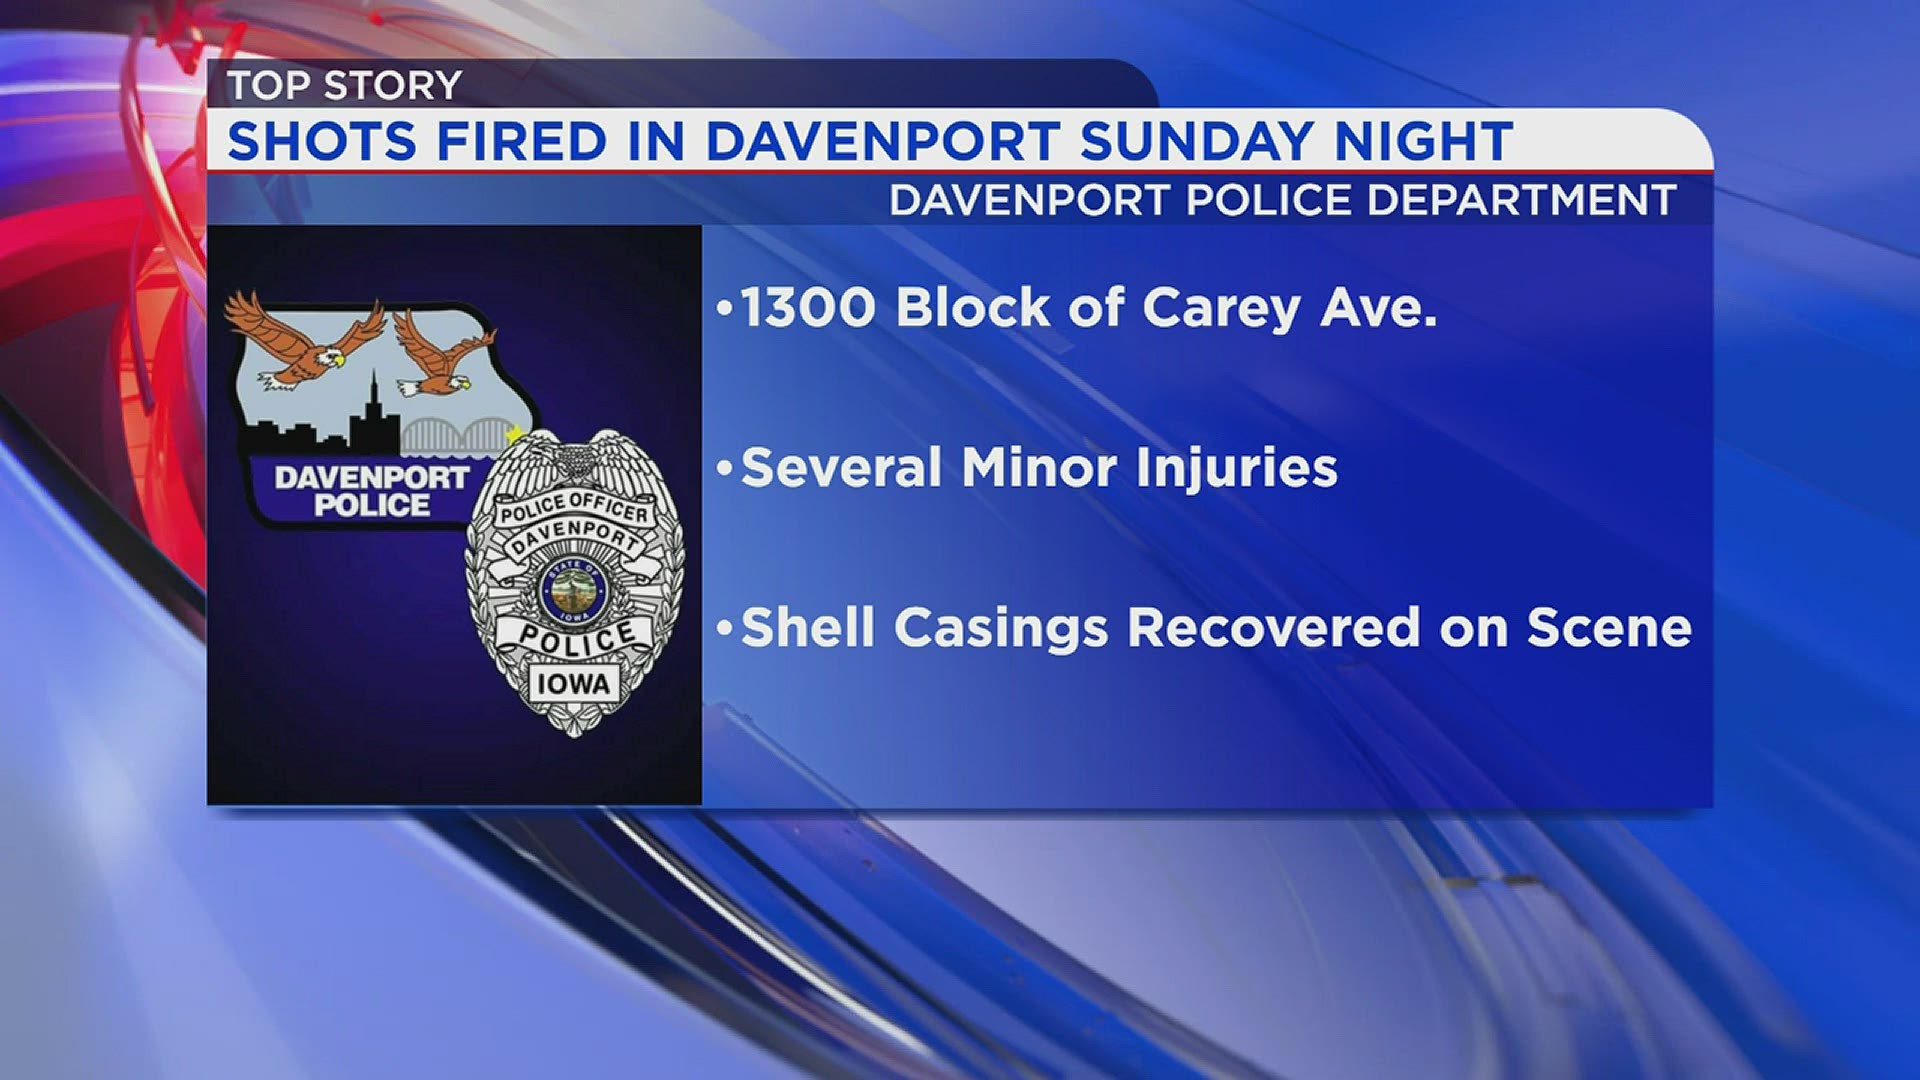 Davenport Police say a number of people are injured after a fight and shots fired call.